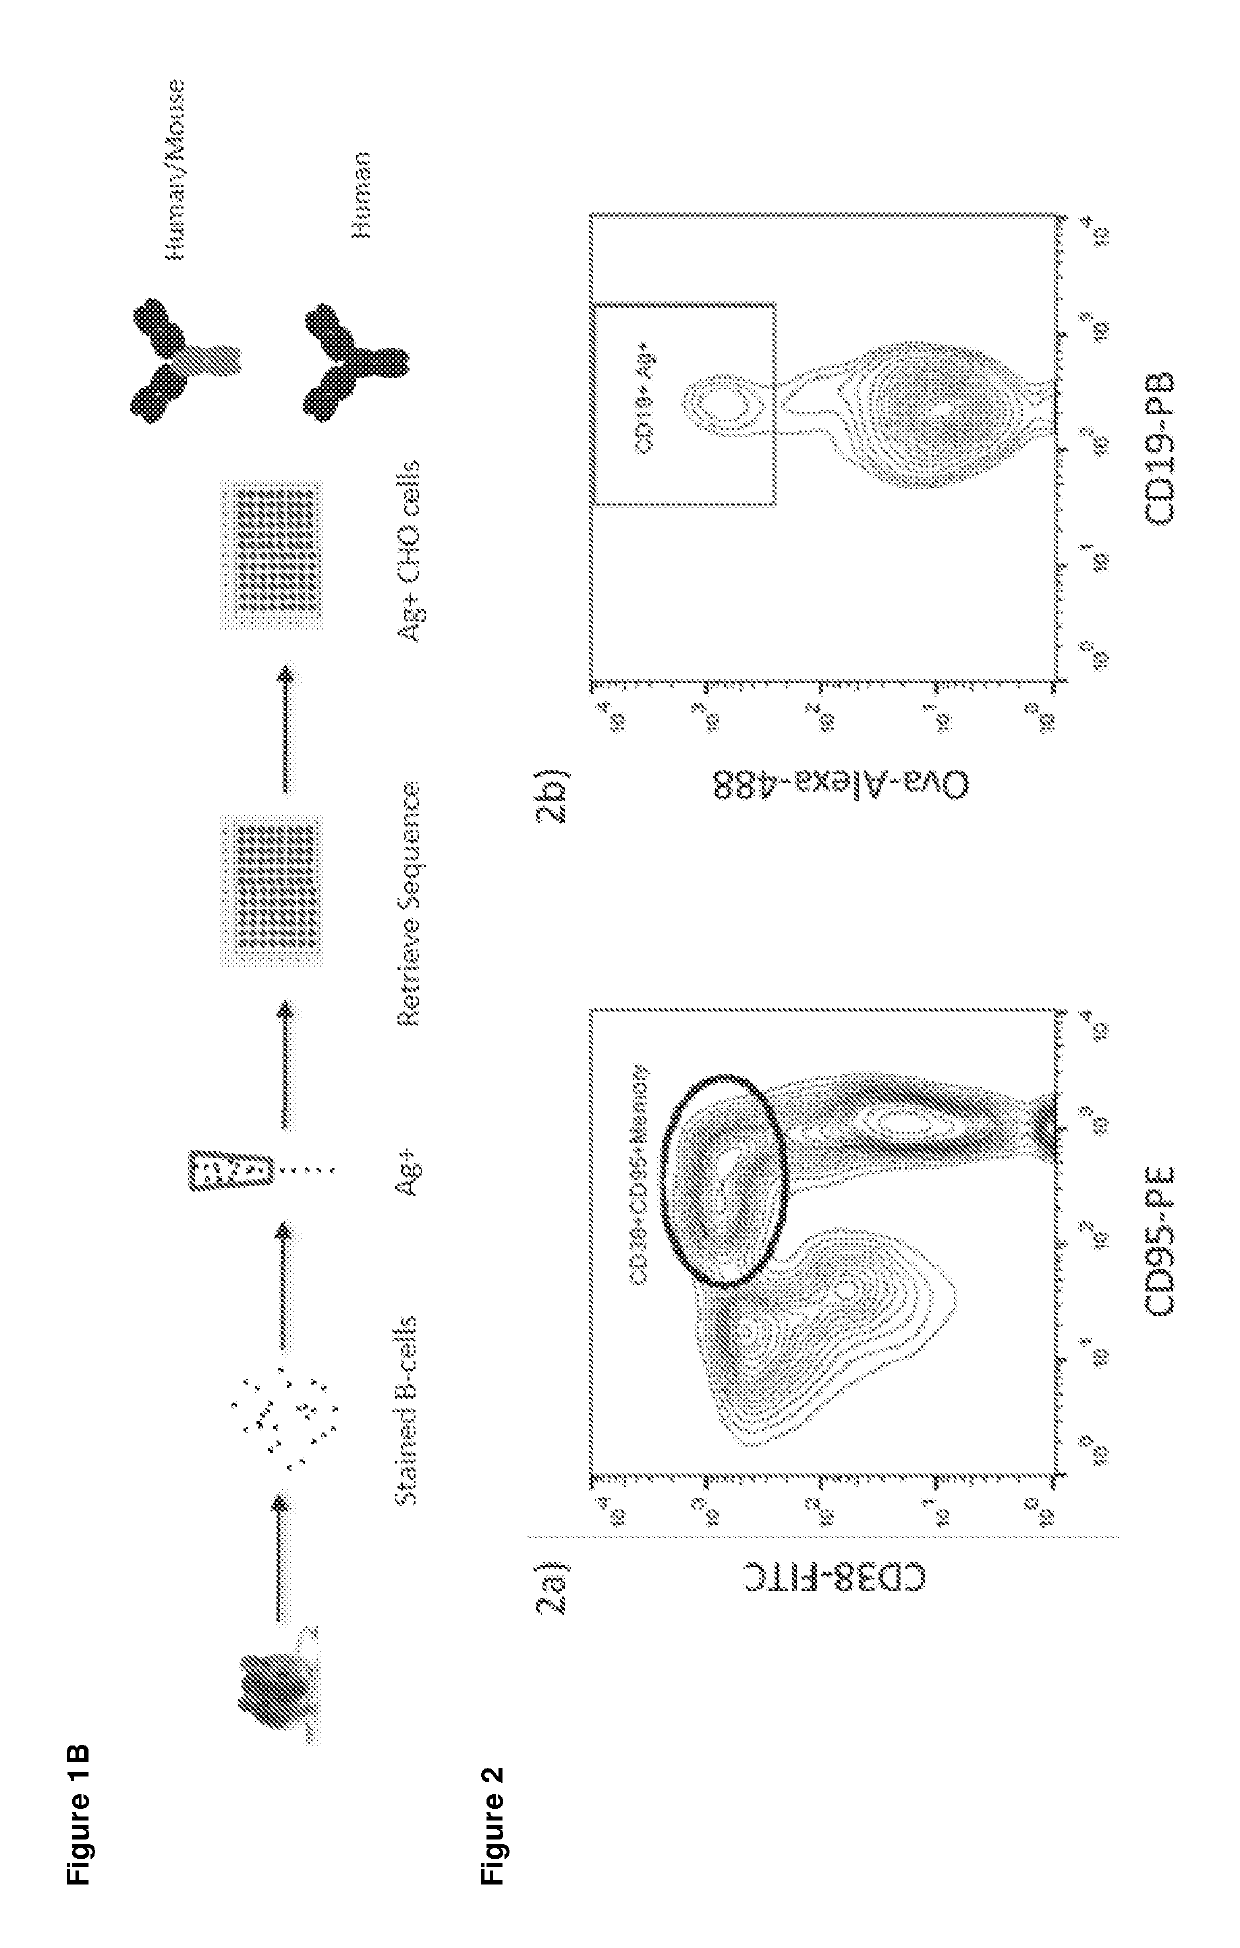 Expression vector production and high-throughput cell screening